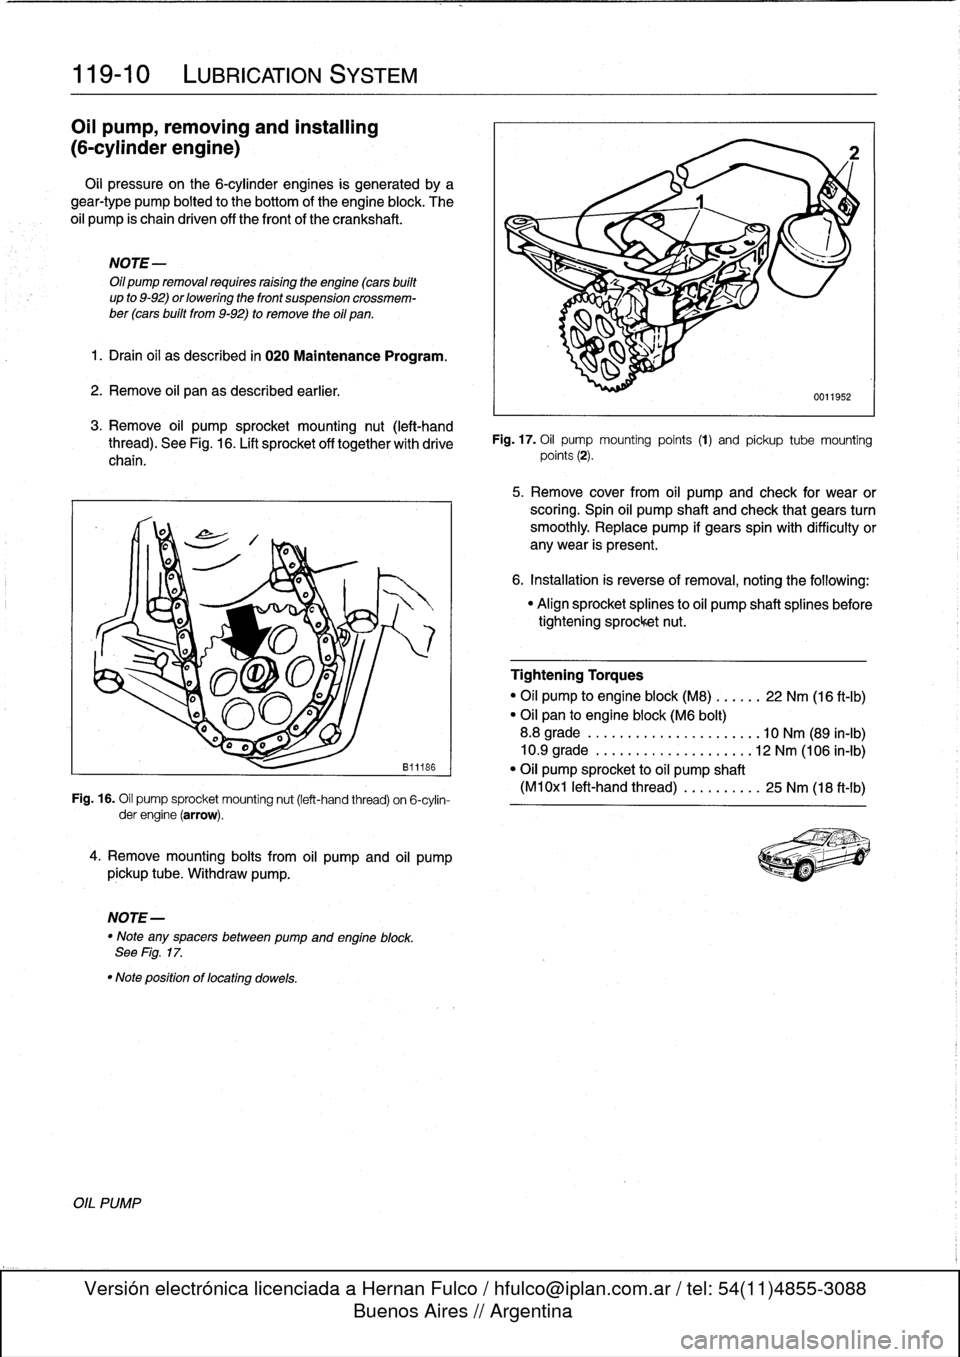 BMW 323i 1997 E36 User Guide 
119-
1
0

	

LUBRICATION
SYSTEM

Oil
pump,
removing
and
installing

(6-cylinder
engine)

Oil
pressure
on
the
6-cylinder
engines
is
generated
by
a
gear-type
pump
bolted
to
the
bottom
of
the
engine
blo